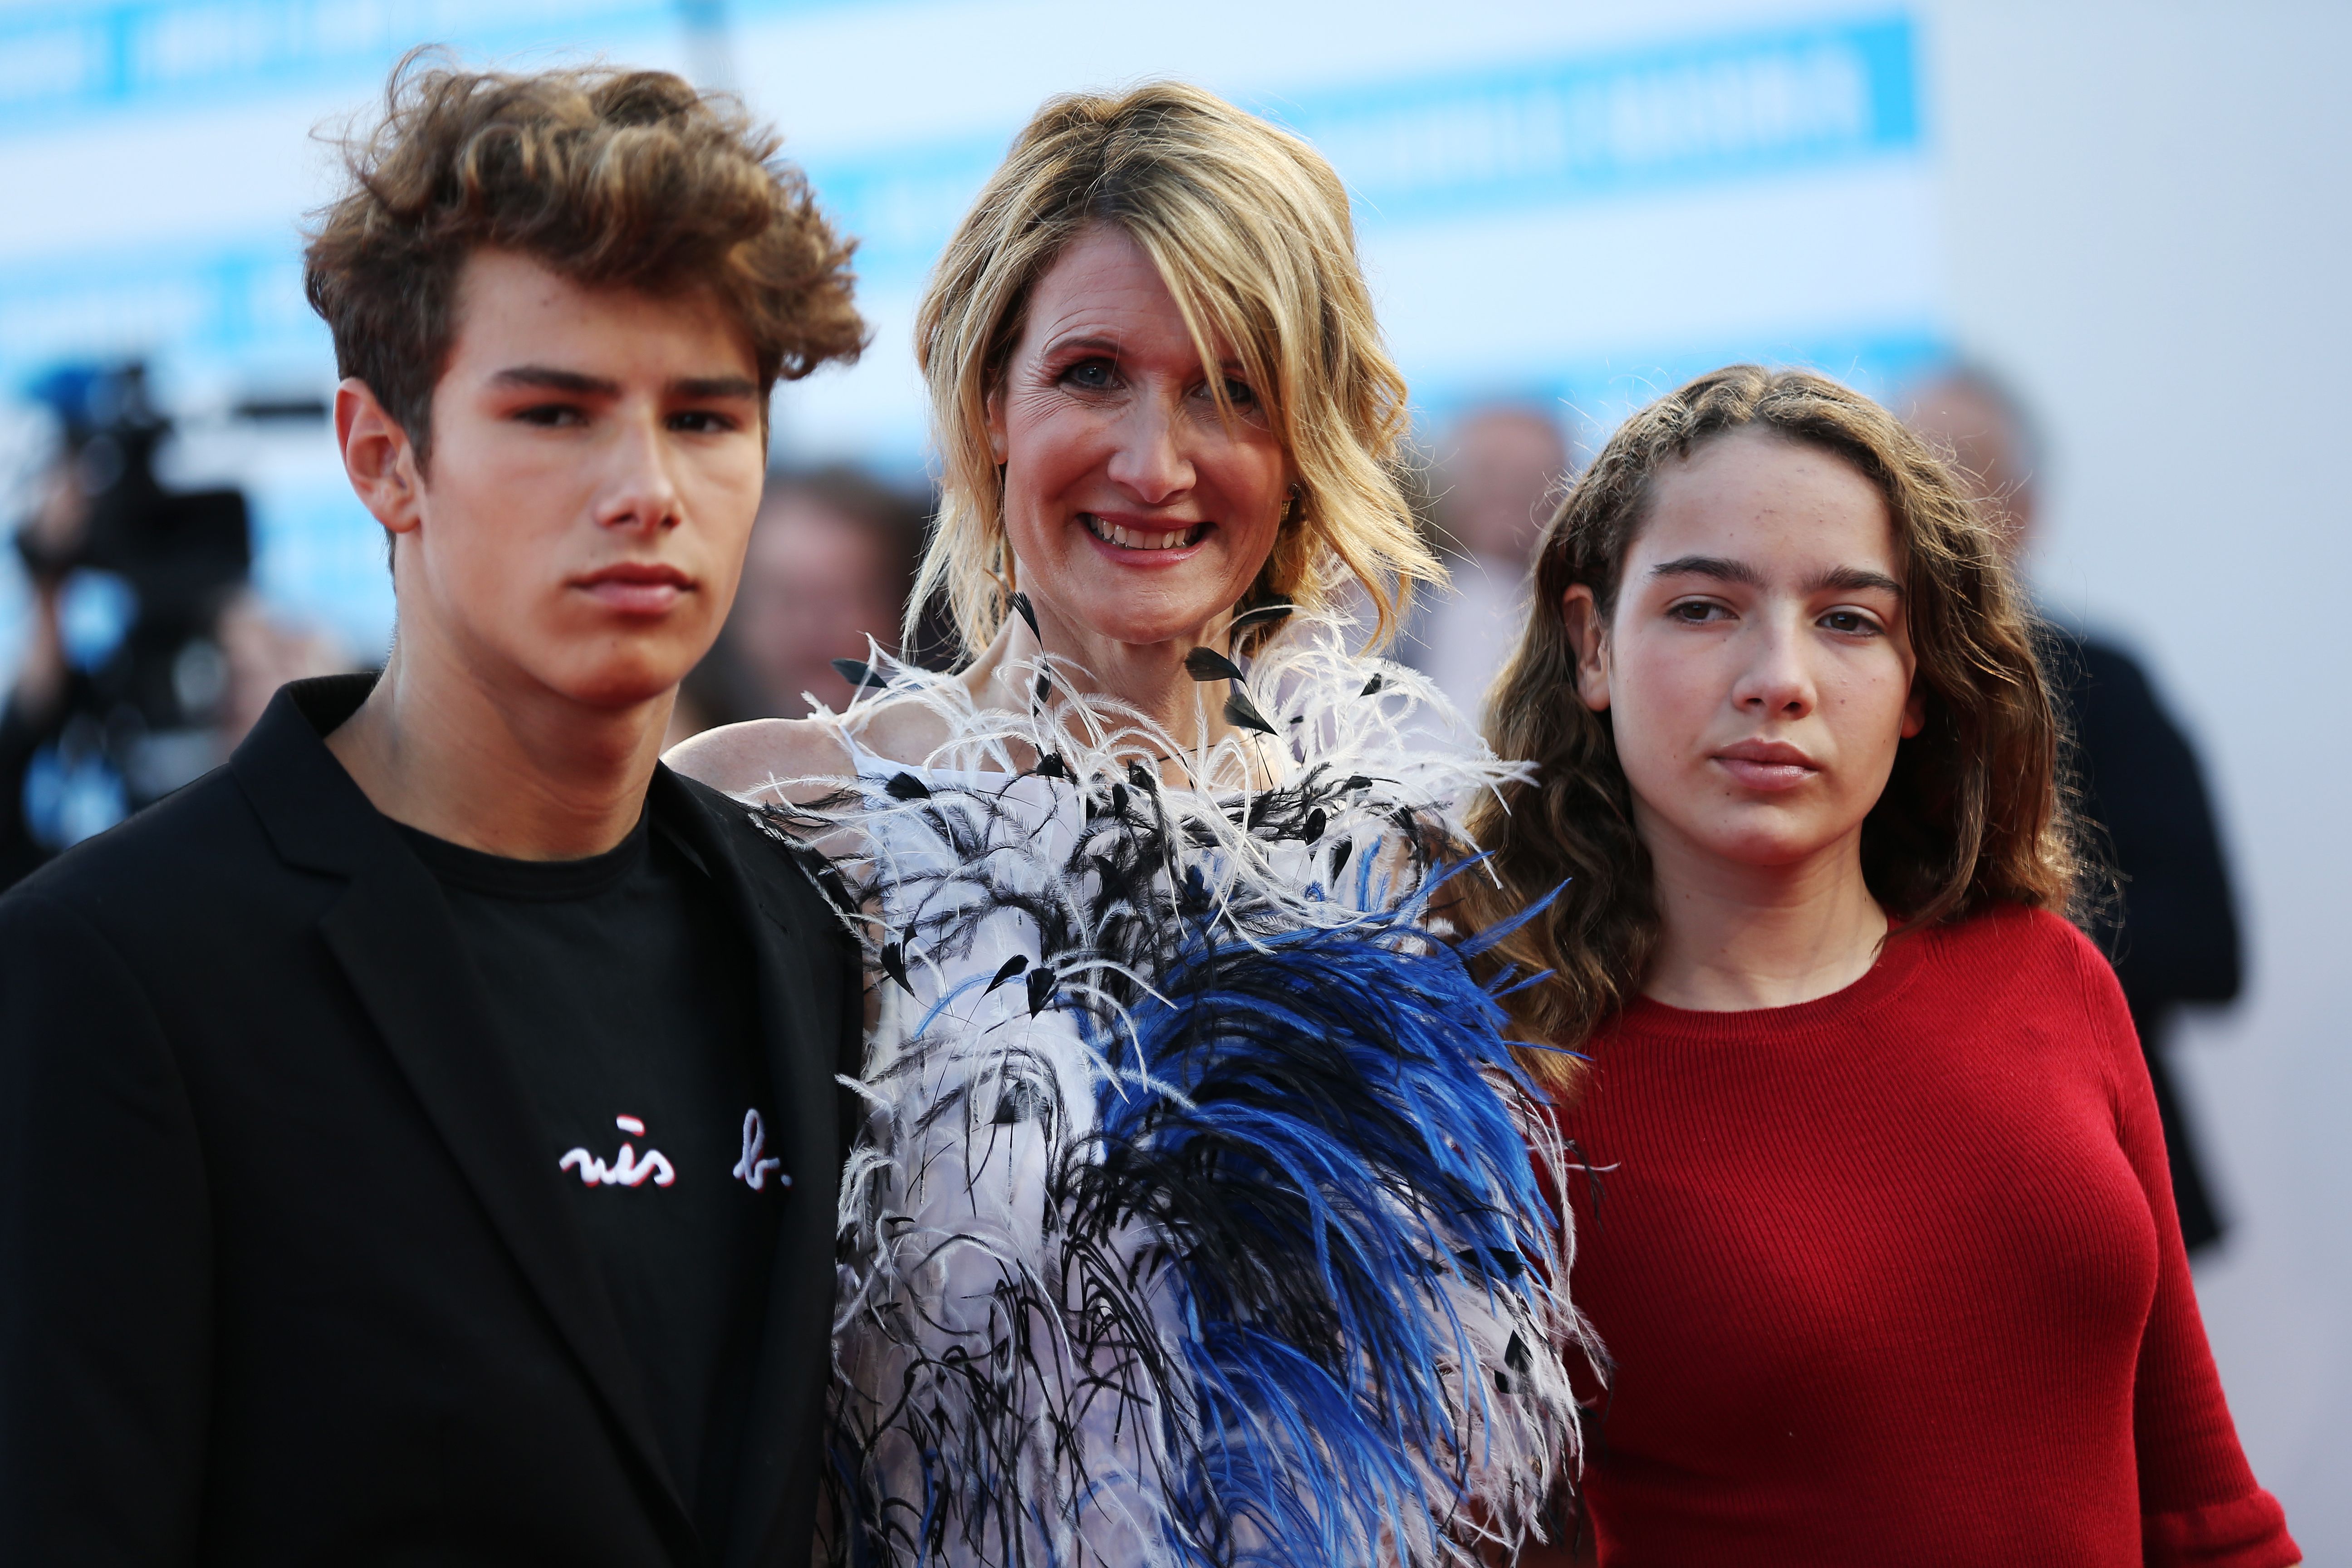 Laura Dern poses with her children, Ellery Walker Harper and Jaya Harper, on the red carpet before the opening ceremony of the 43rd Deauville US Film Festival in the French northwestern sea resort of Deauville on September 1, 2017 | Source: Getty Images